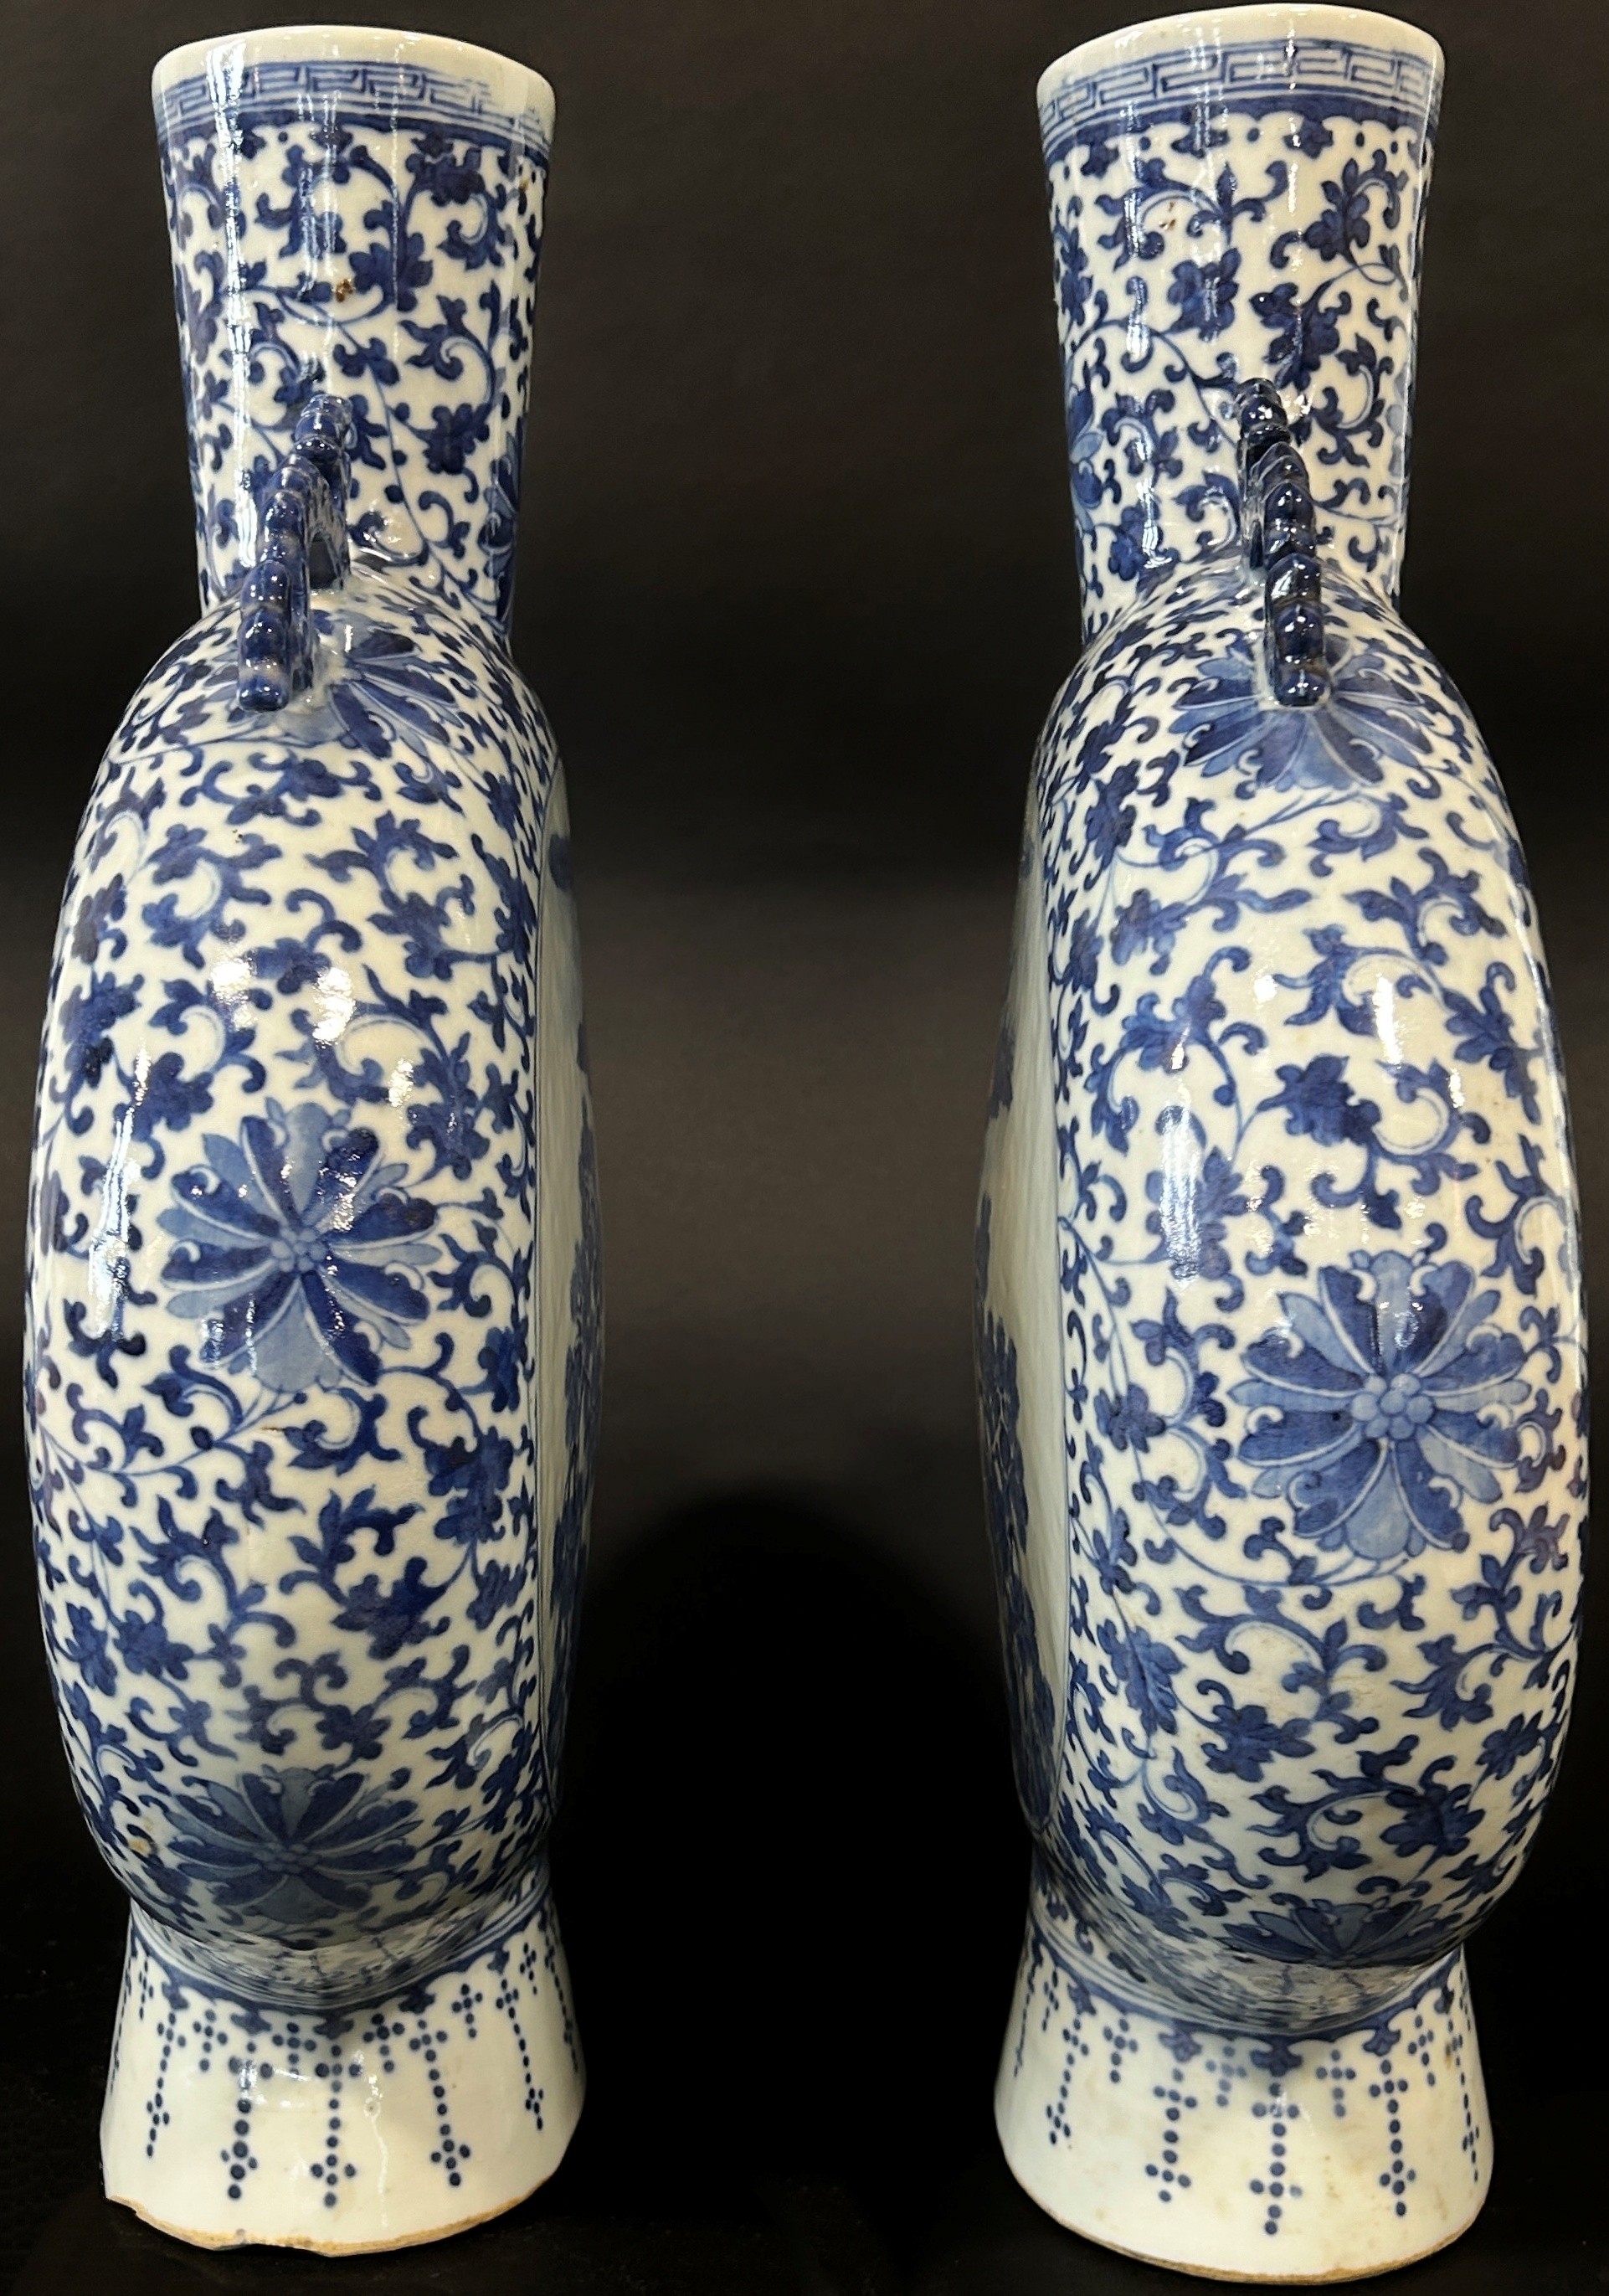 A pair of large blue and white Chinese moon flasks, Qing Dynasty showing characters in landscape - Image 3 of 4